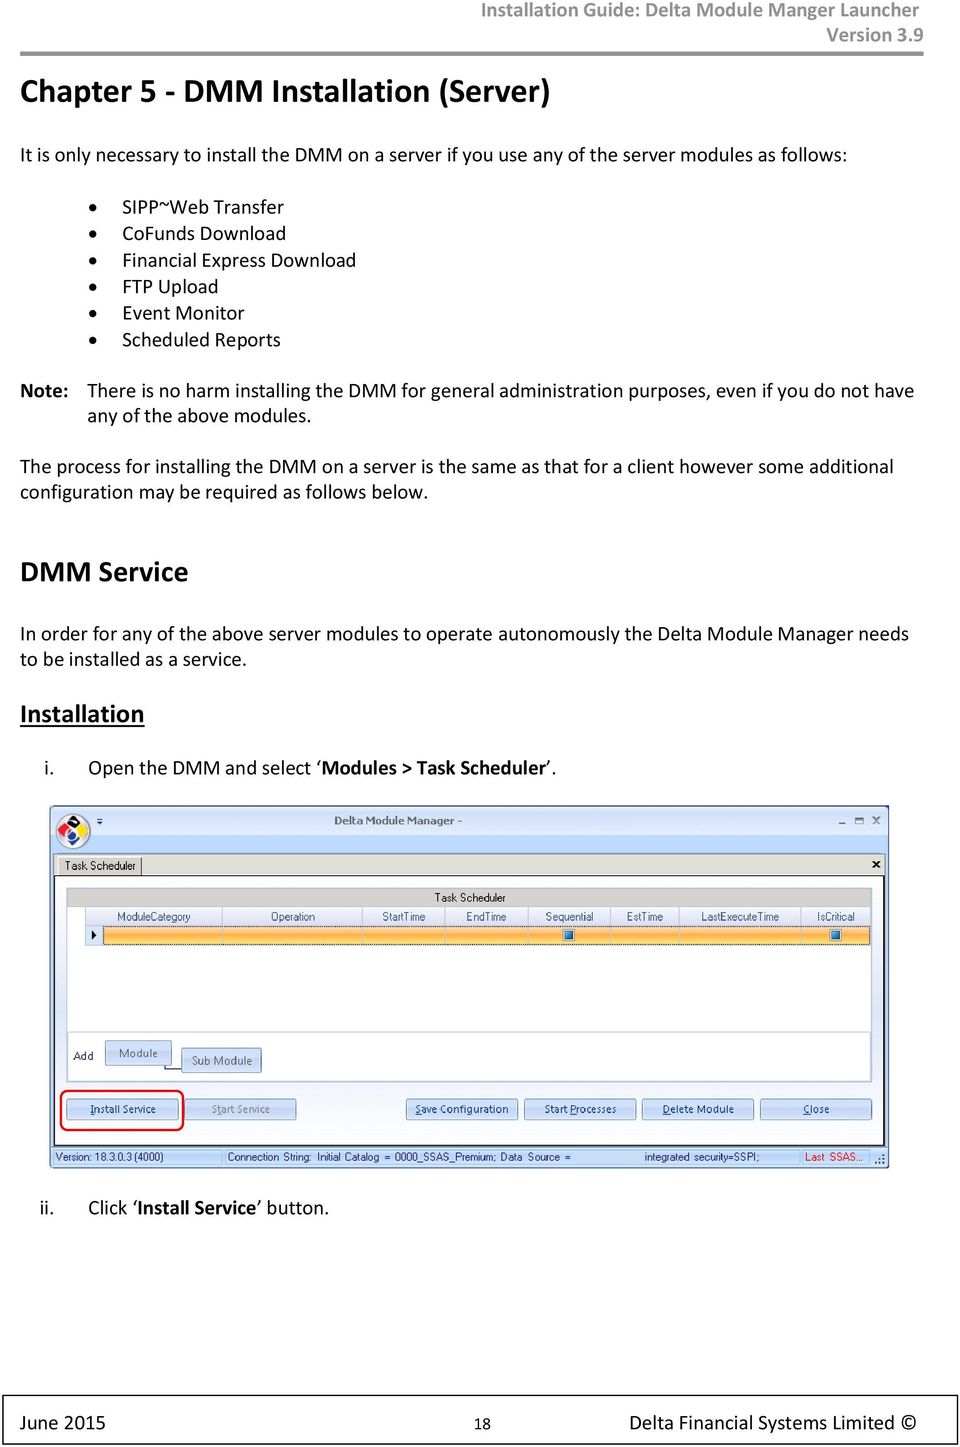 any of the above modules. The process for installing the DMM on a server is the same as that for a client however some additional configuration may be required as follows below.